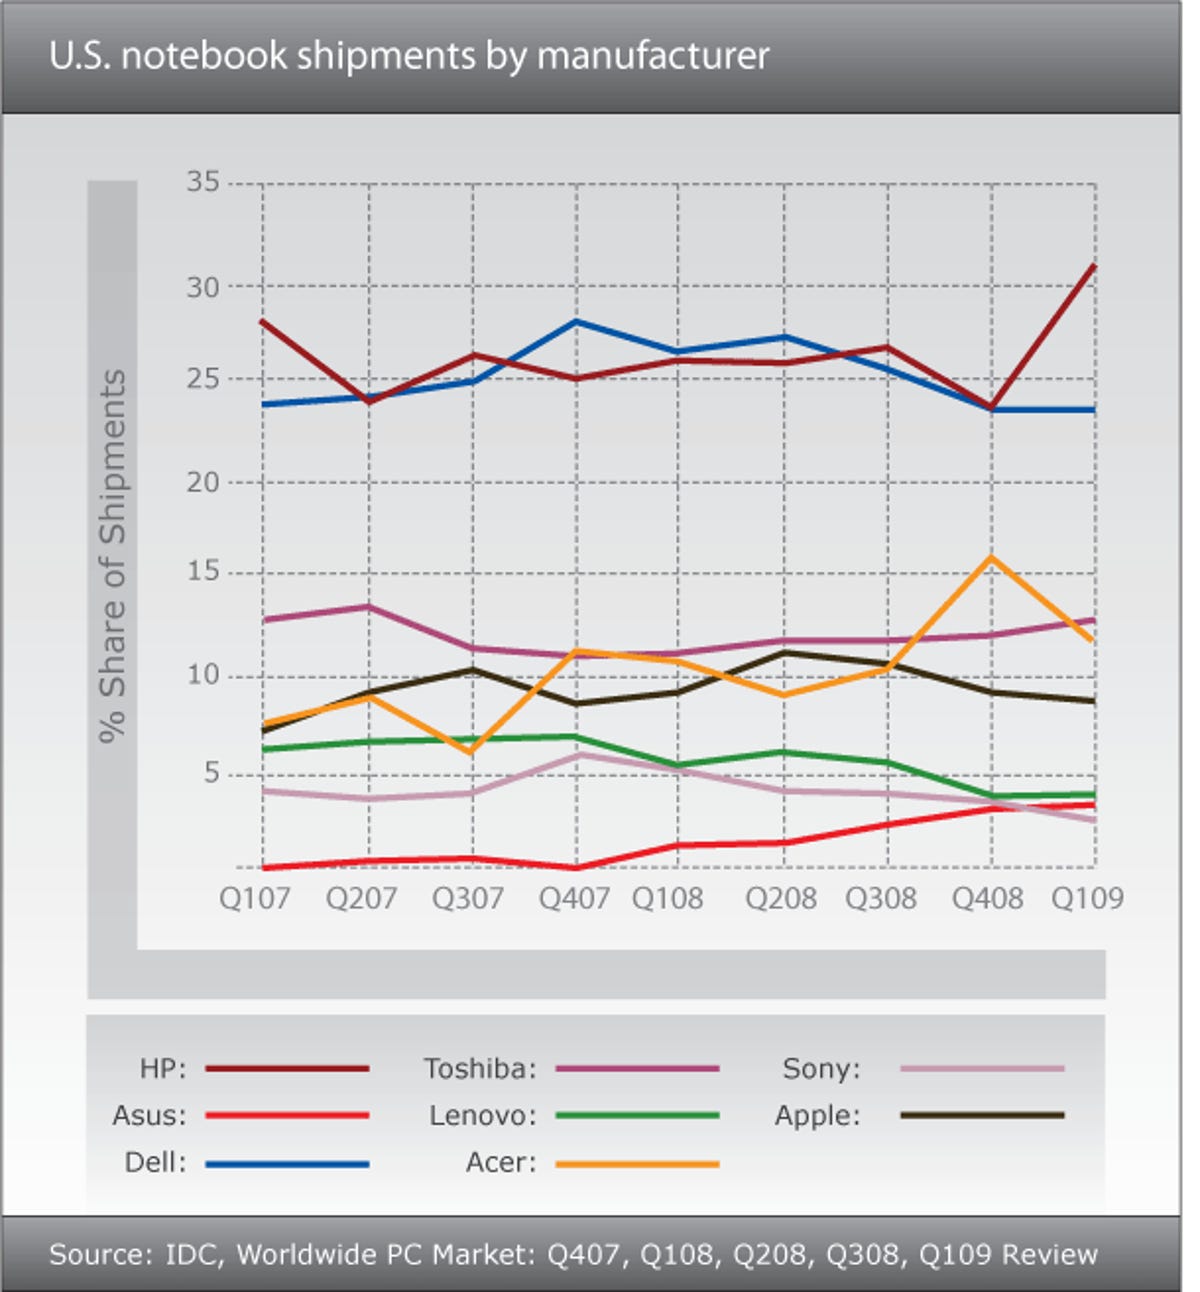 U.S. notebook shipments by manufacturer